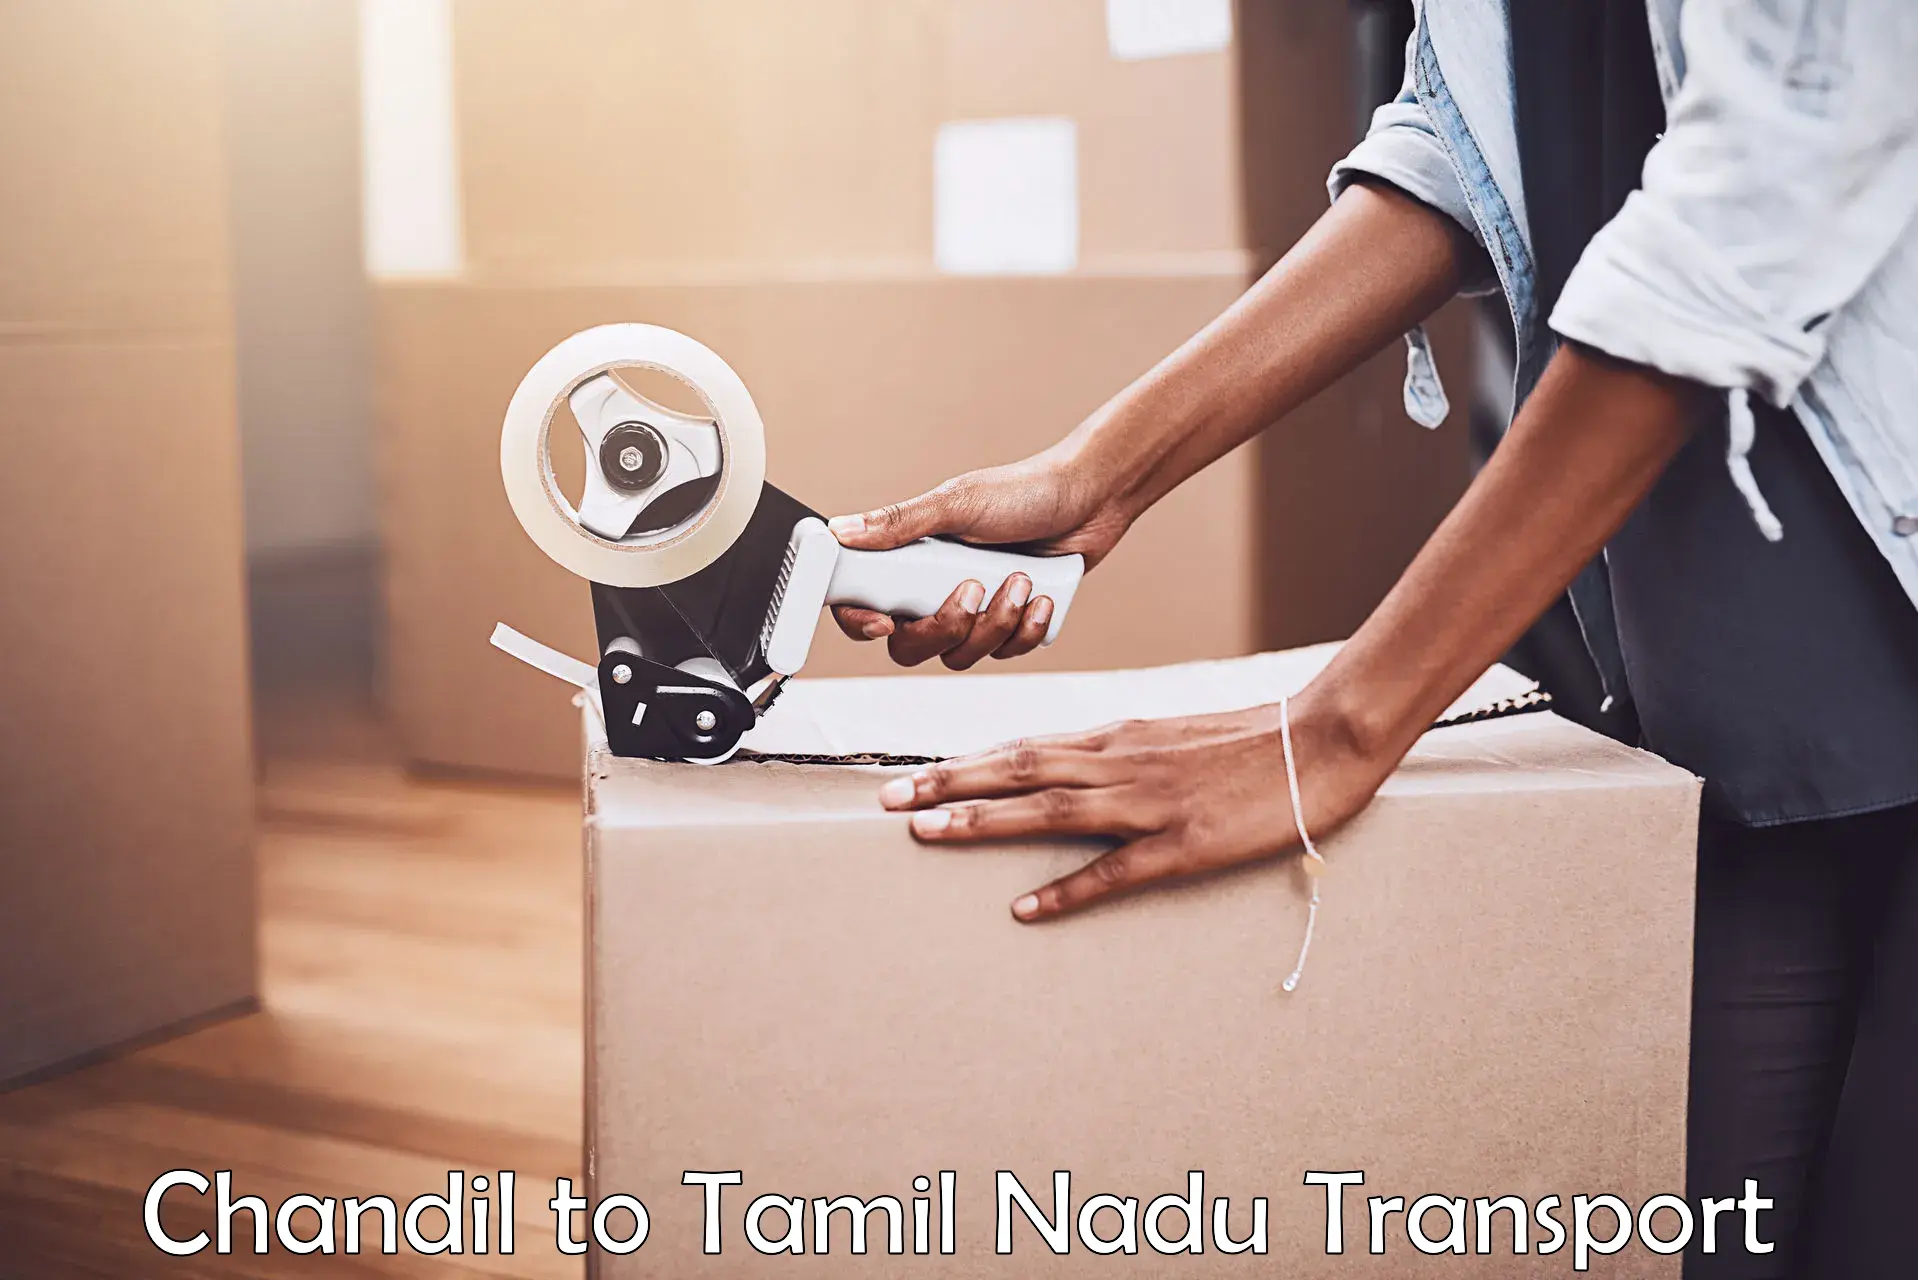 Pick up transport service in Chandil to Namakkal